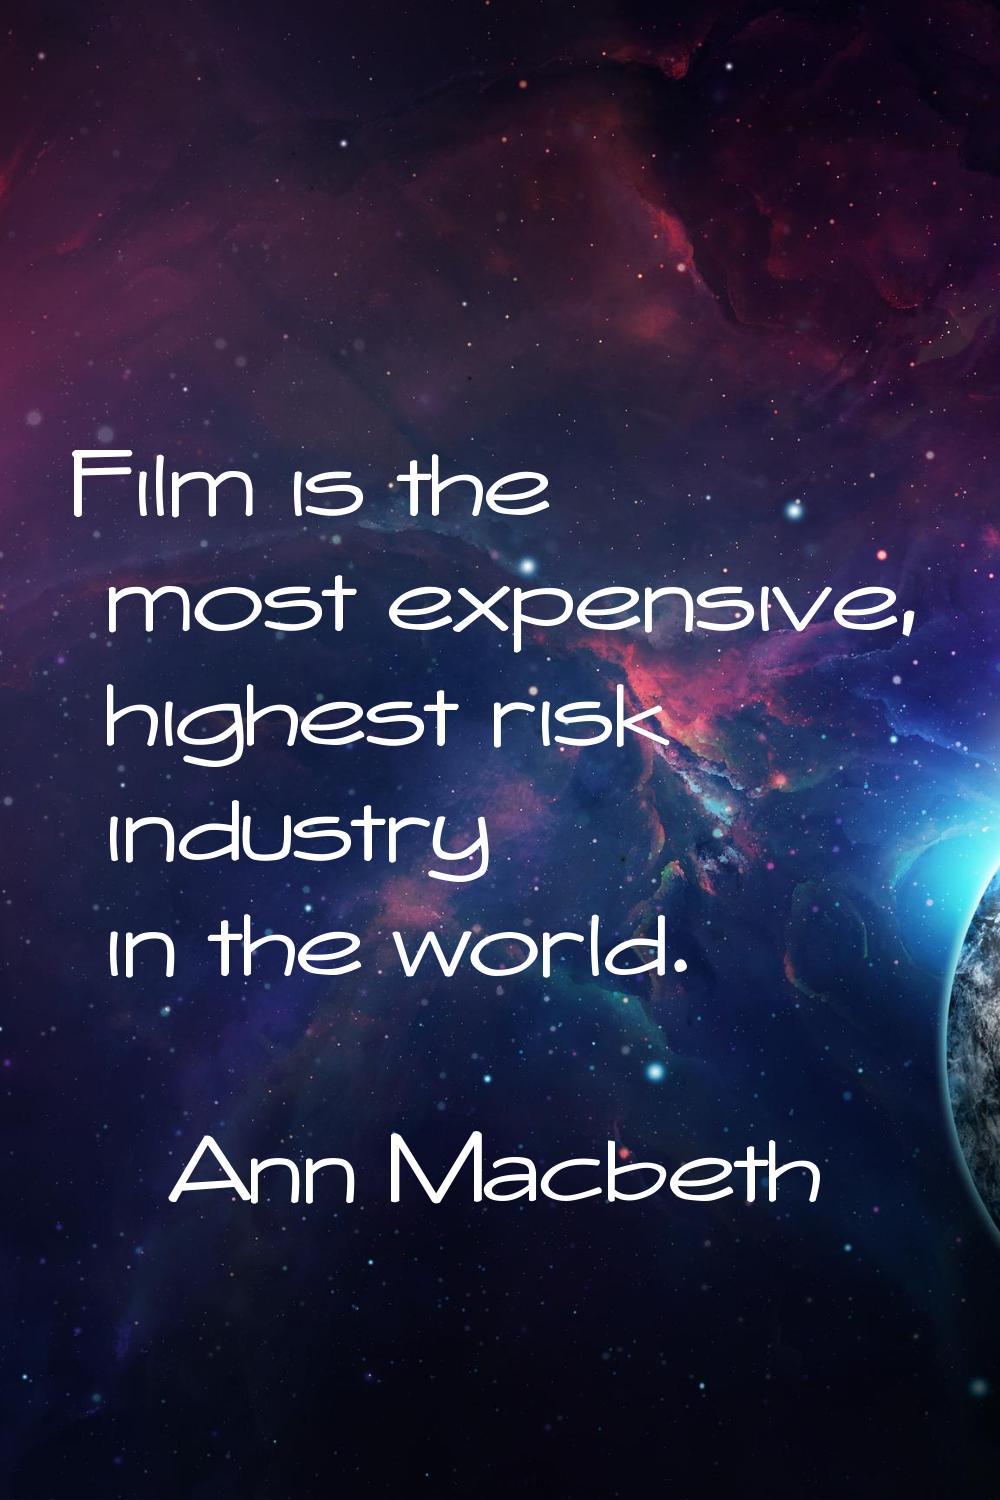 Film is the most expensive, highest risk industry in the world.